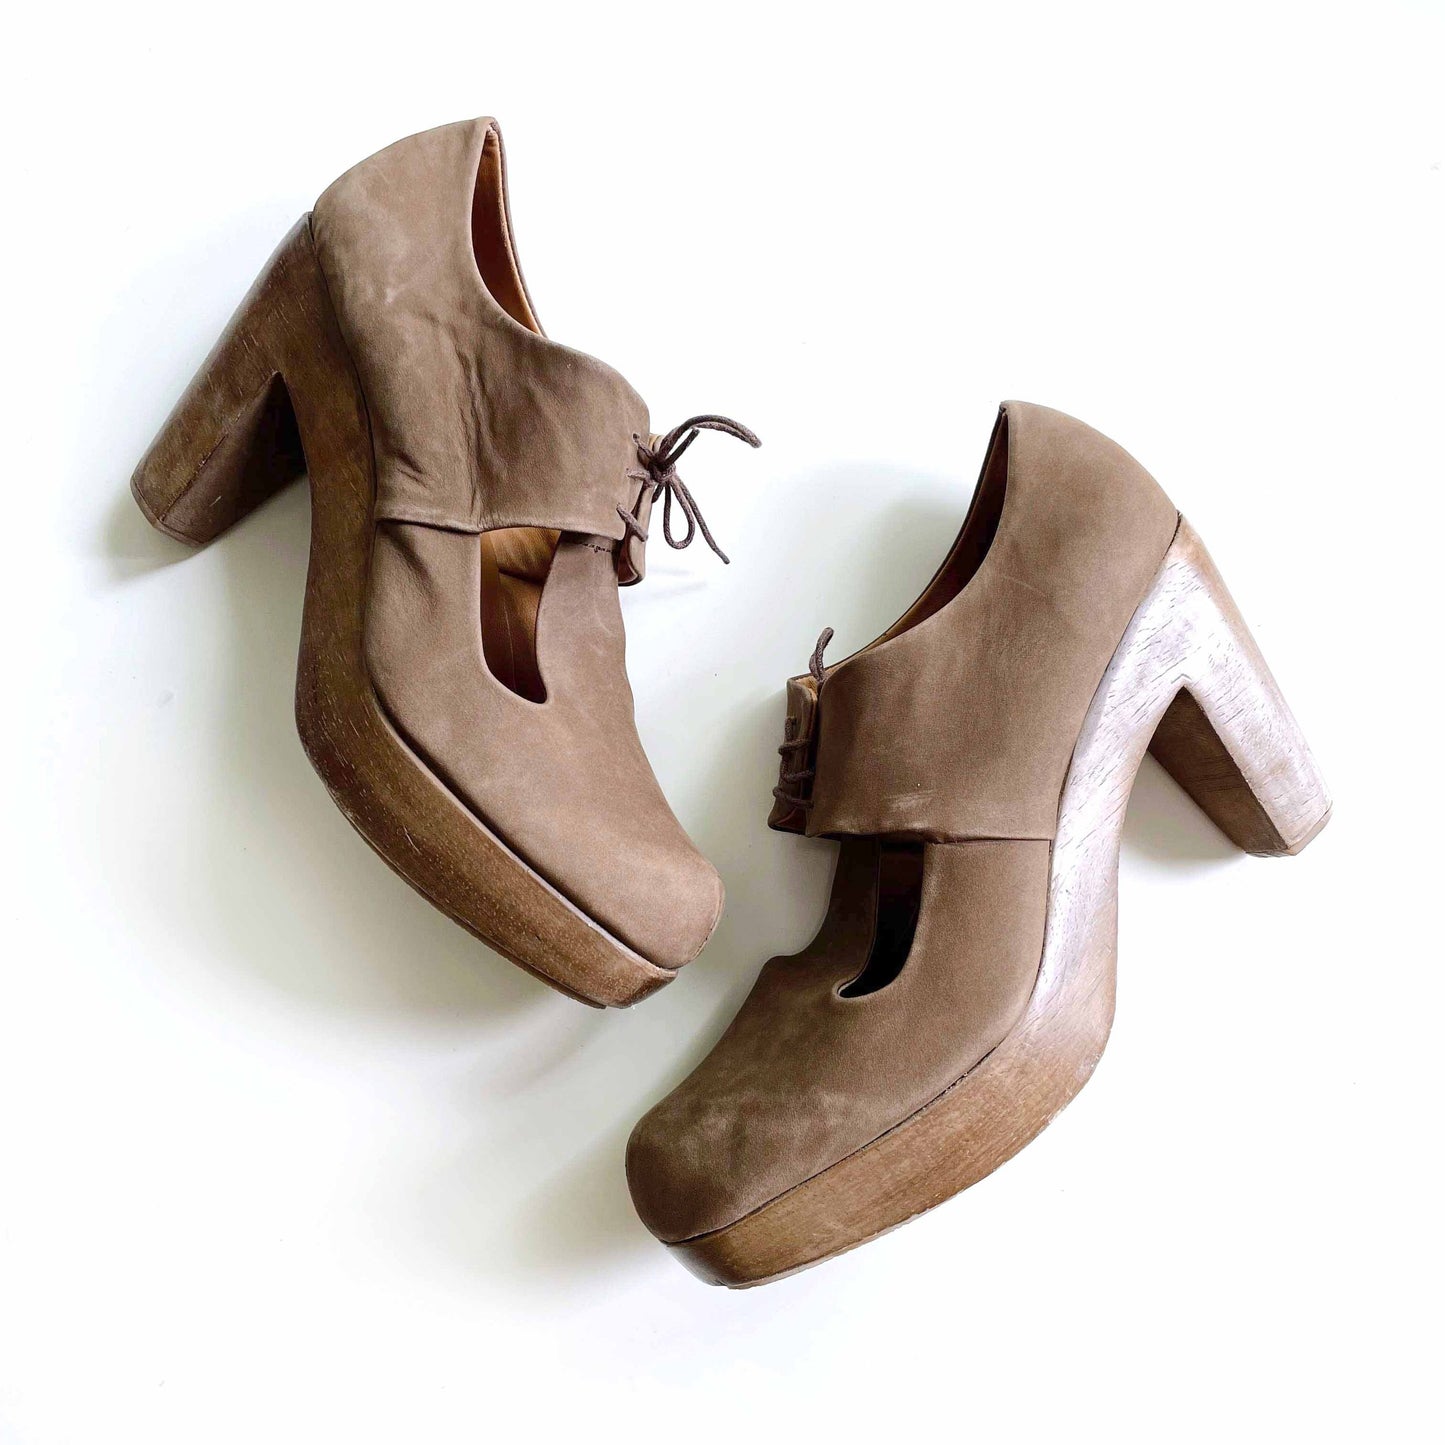 anthro rachel comey leather cut out wood clogs - size 10